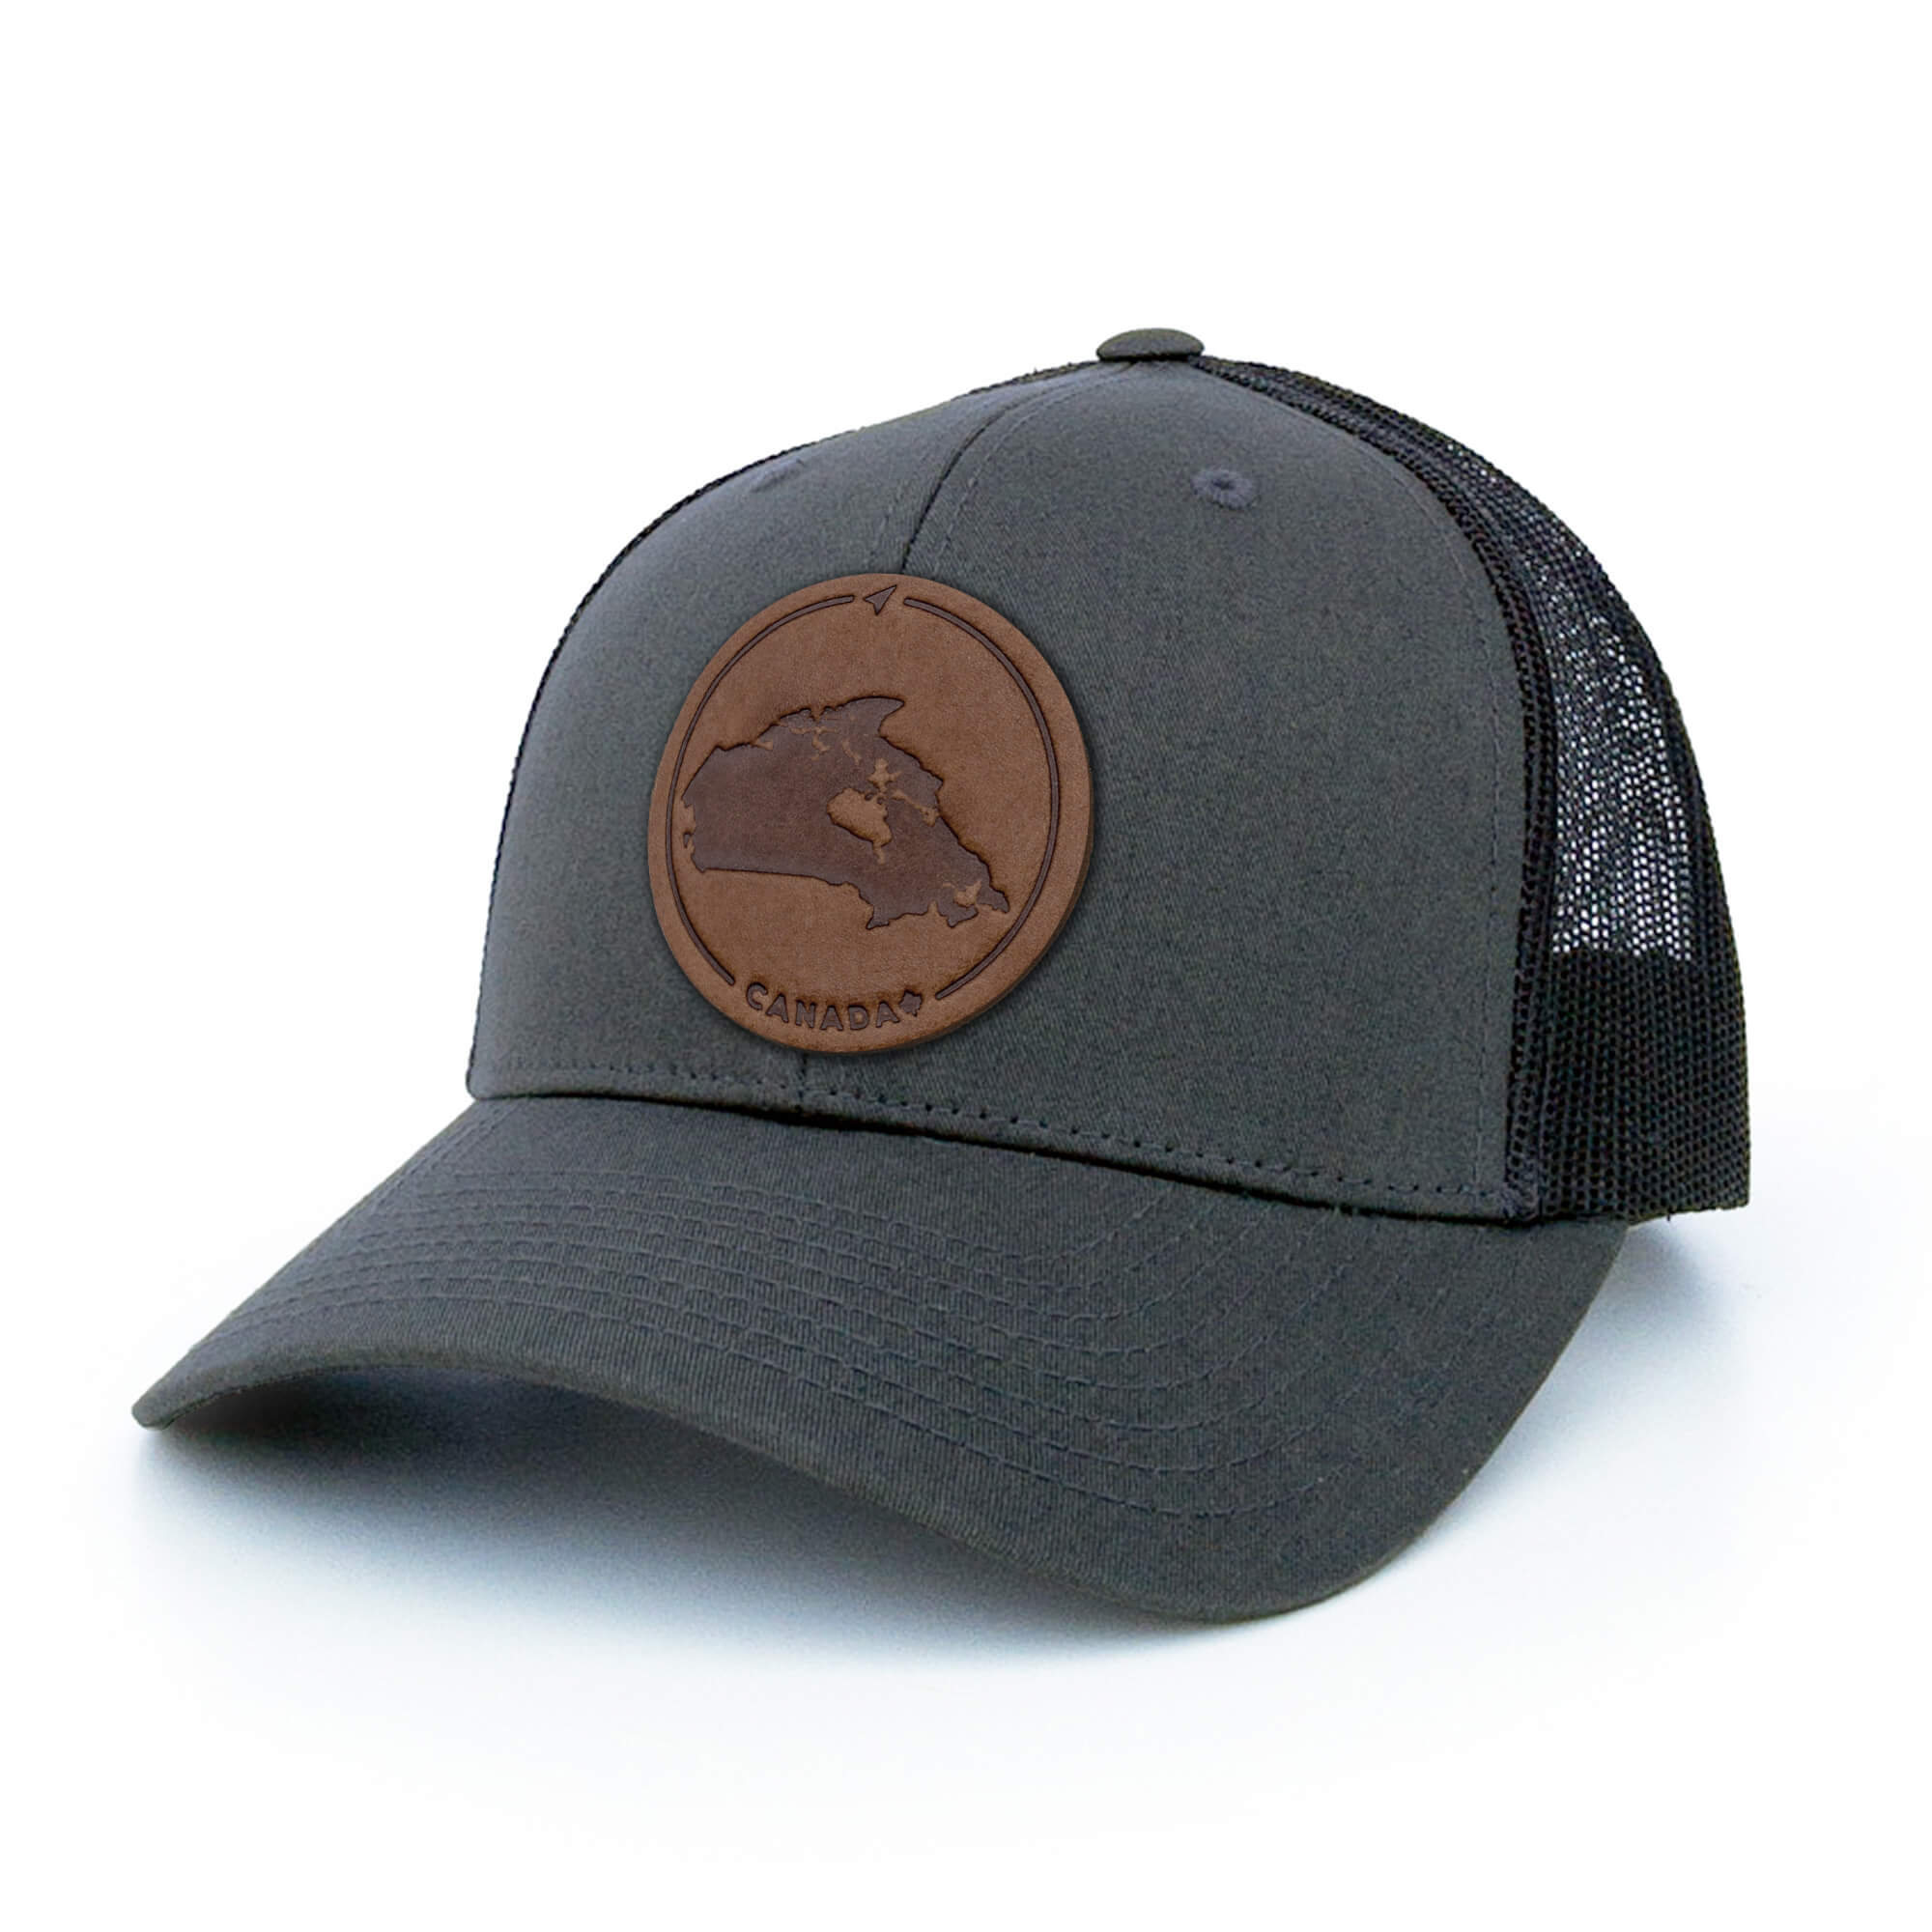 Canada Leather Patch Hat